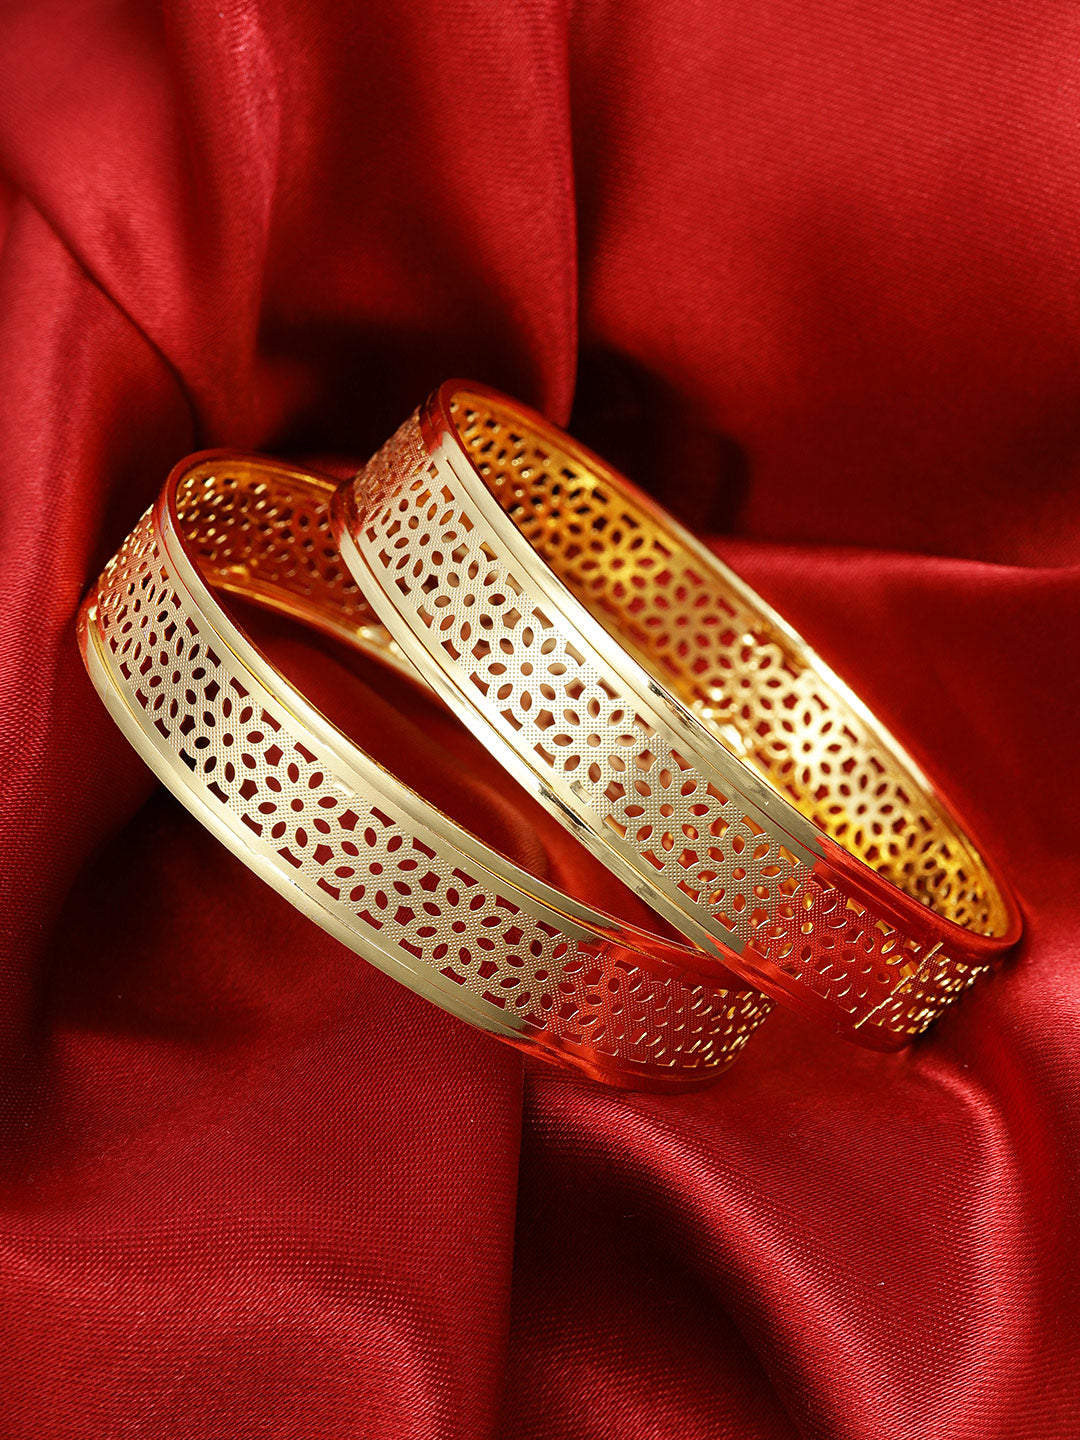 Set Of 2 Designer Gold Plated Engraved Stylish Bangles For Women And Girls